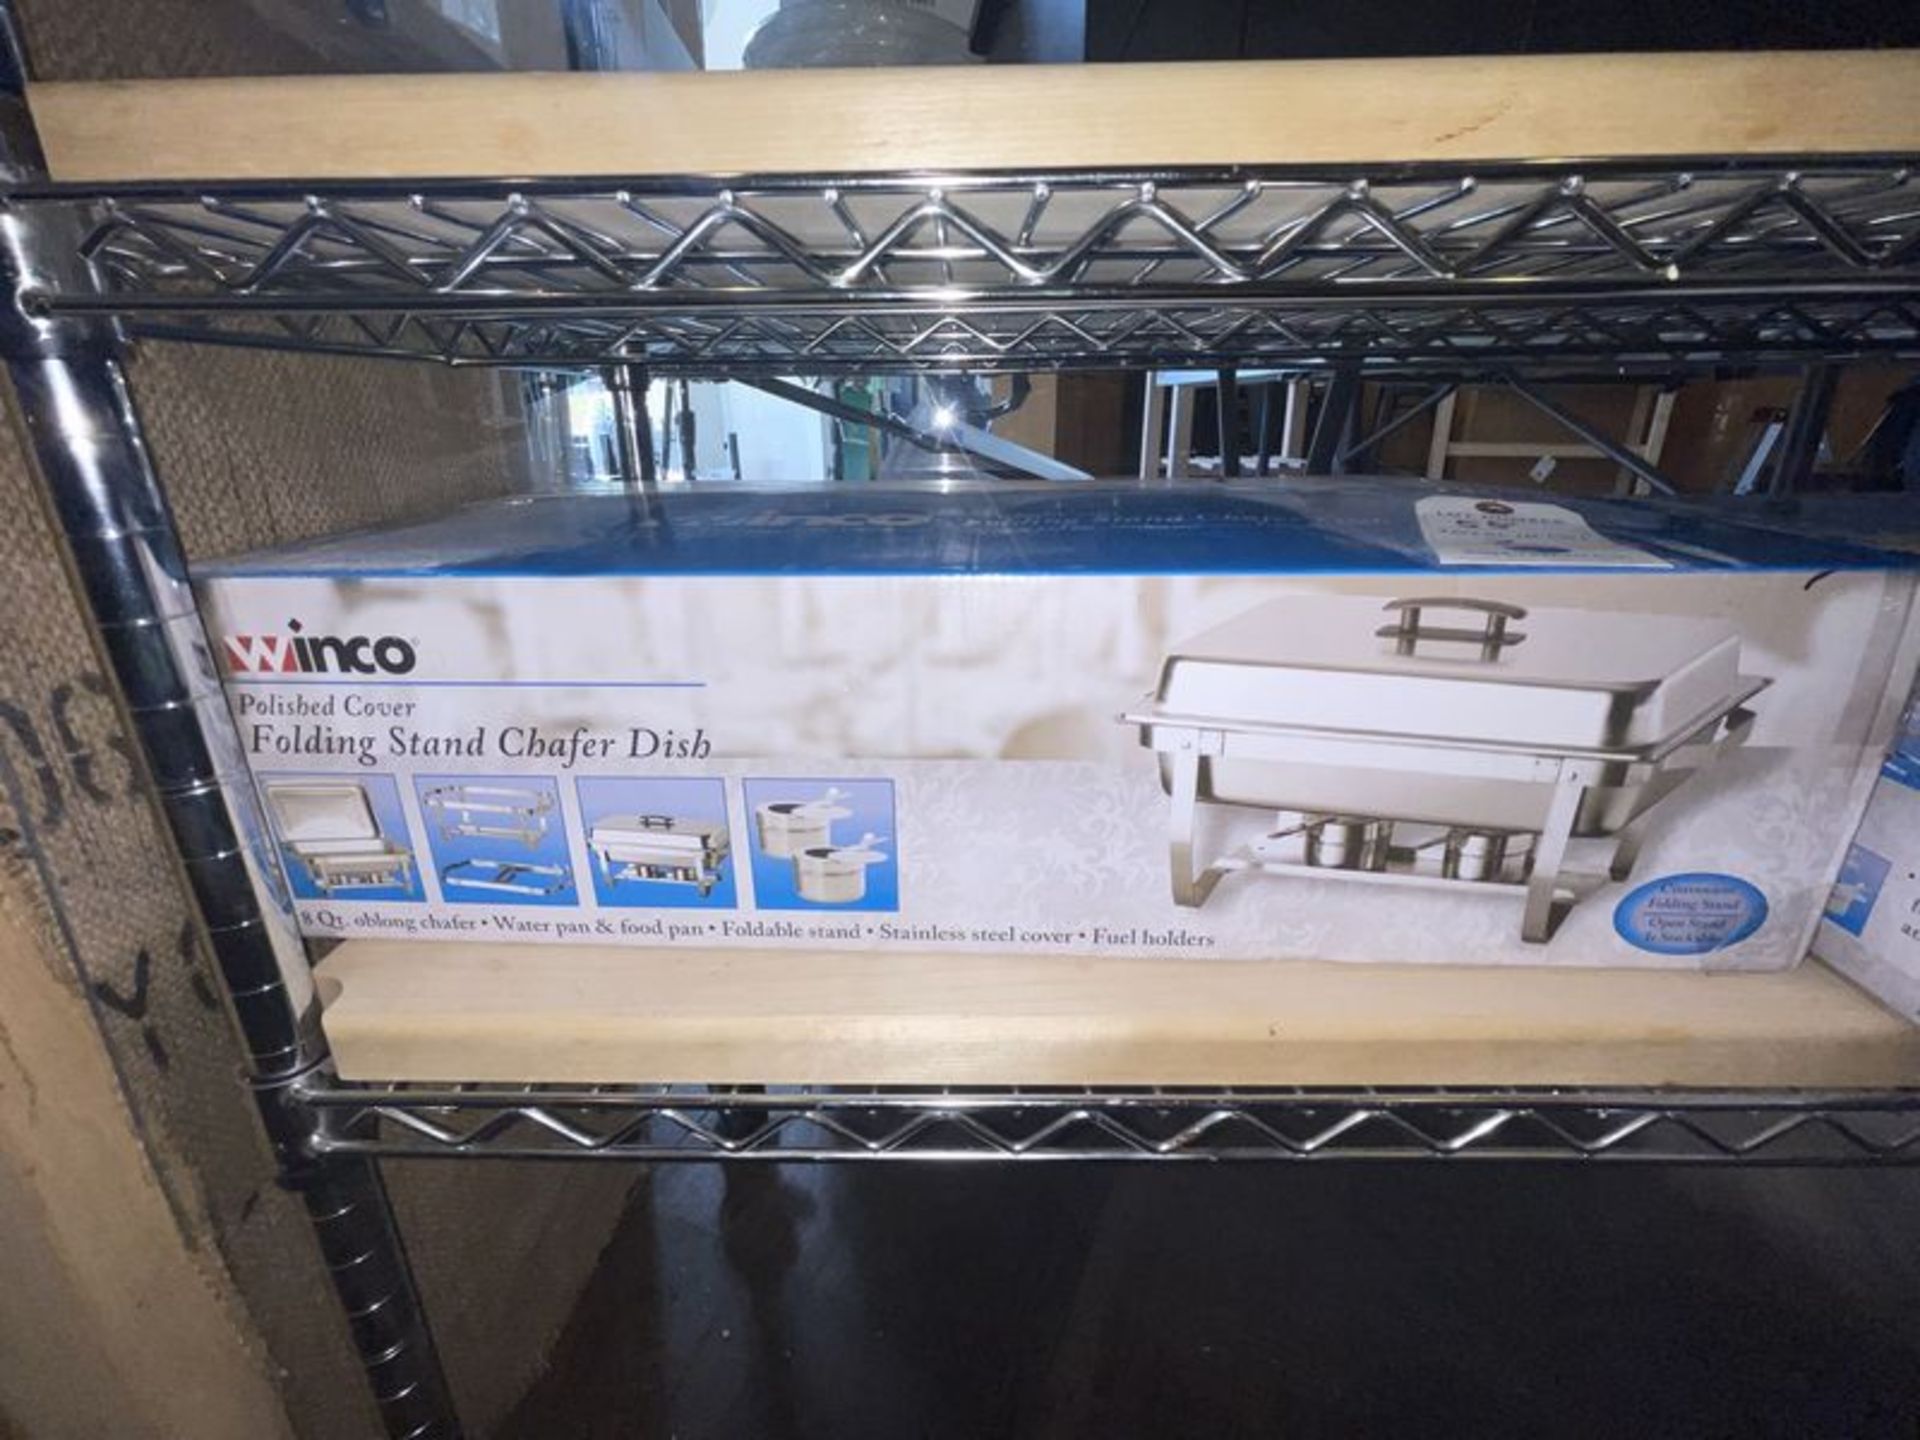 (2) Nib Winco Polish Cover Folding Stand Chafing Dishes (All items sold for removal by Friday